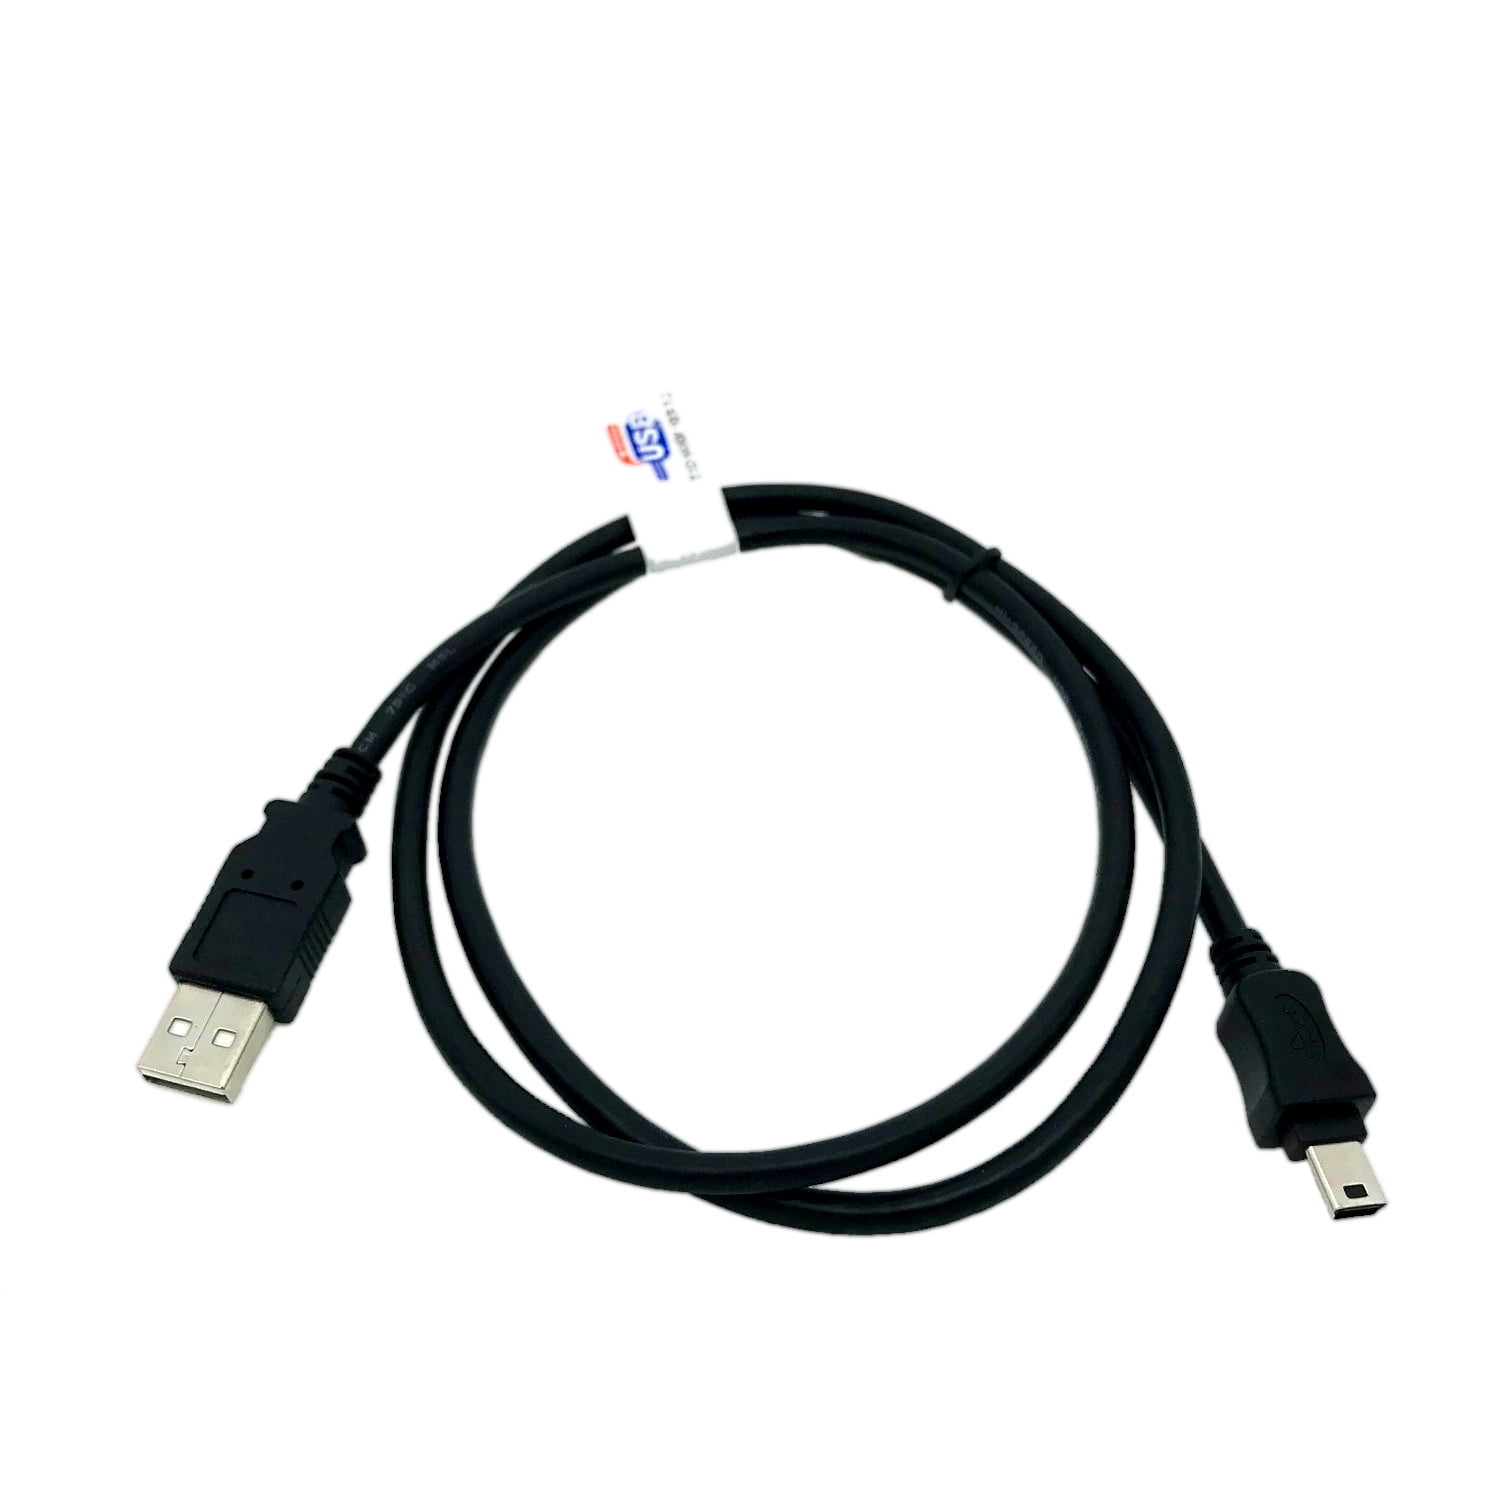 USB 2.0 A to Mini USB 5 Pin Data Cable for Garmin Nuvi 265 265T 265w 265WT 270 